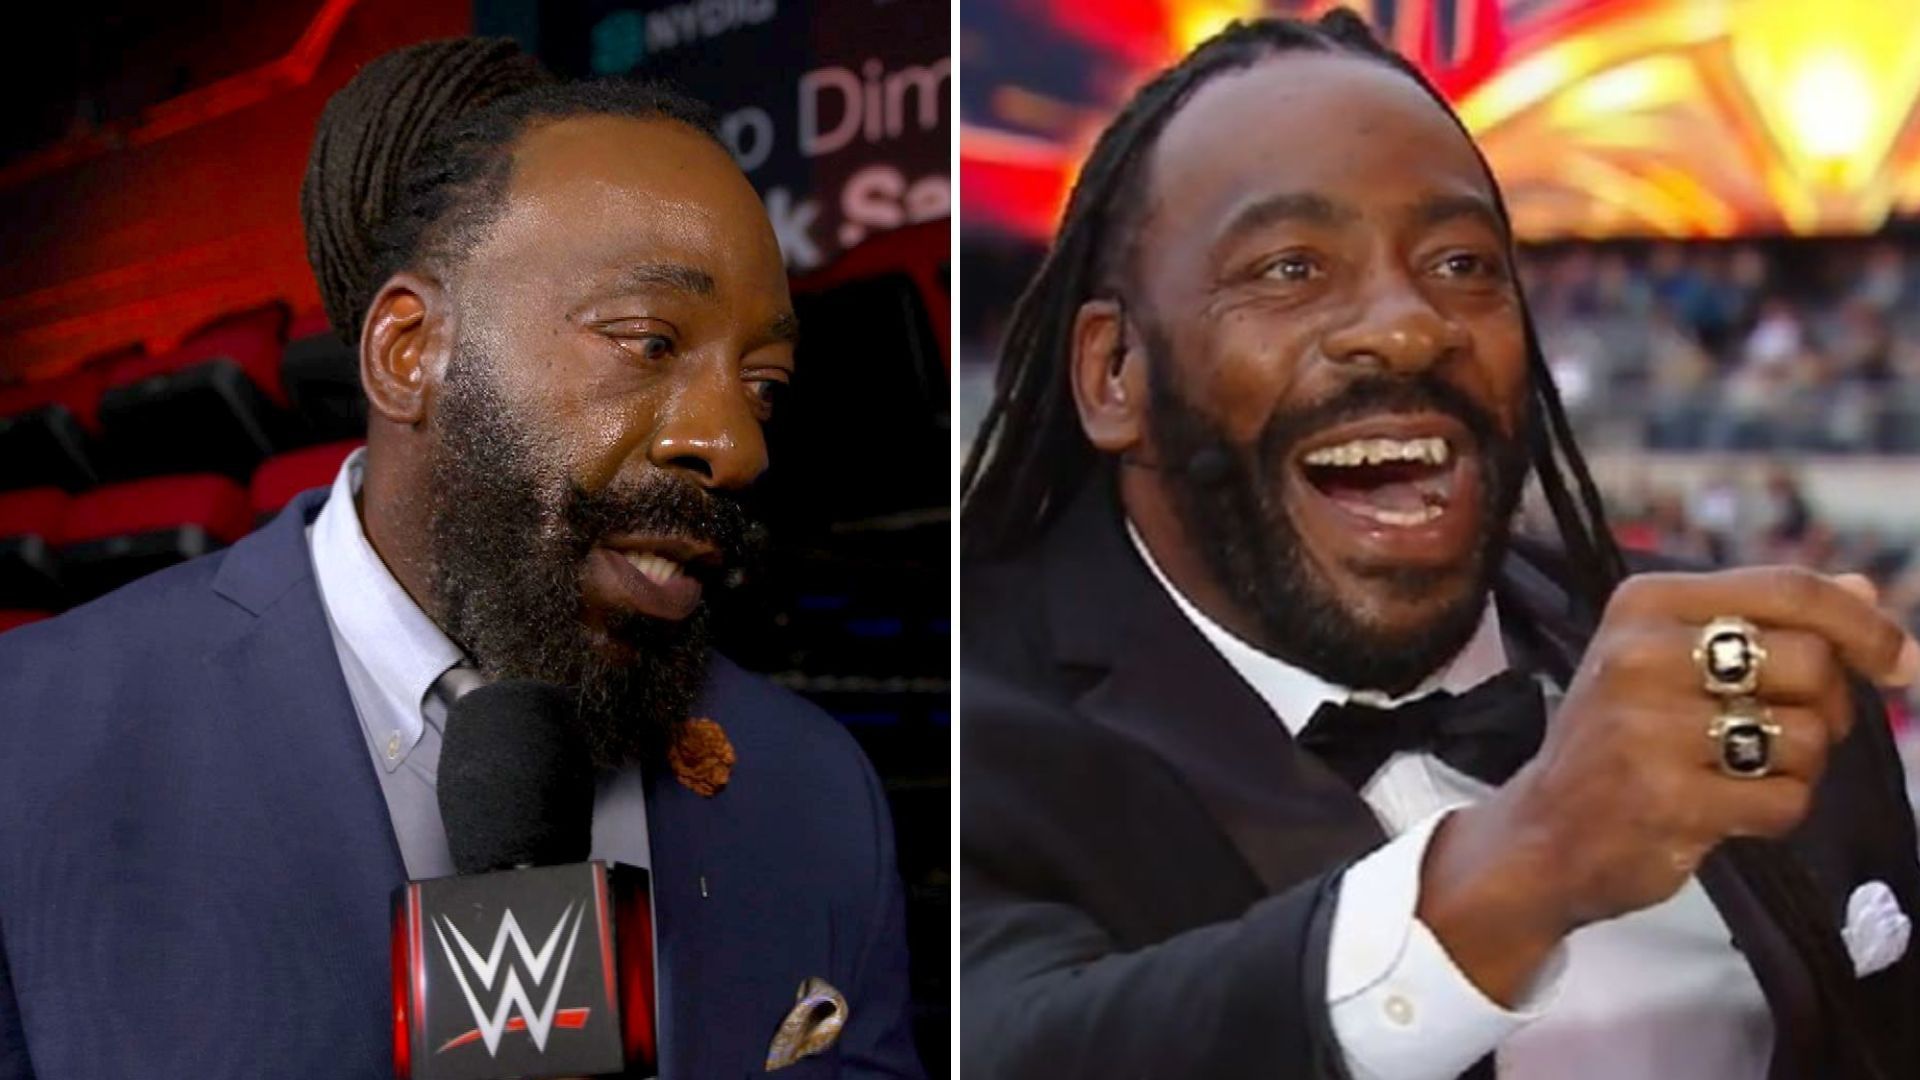 WWE Hall of Famer Booker T is currently an announcer on NXT